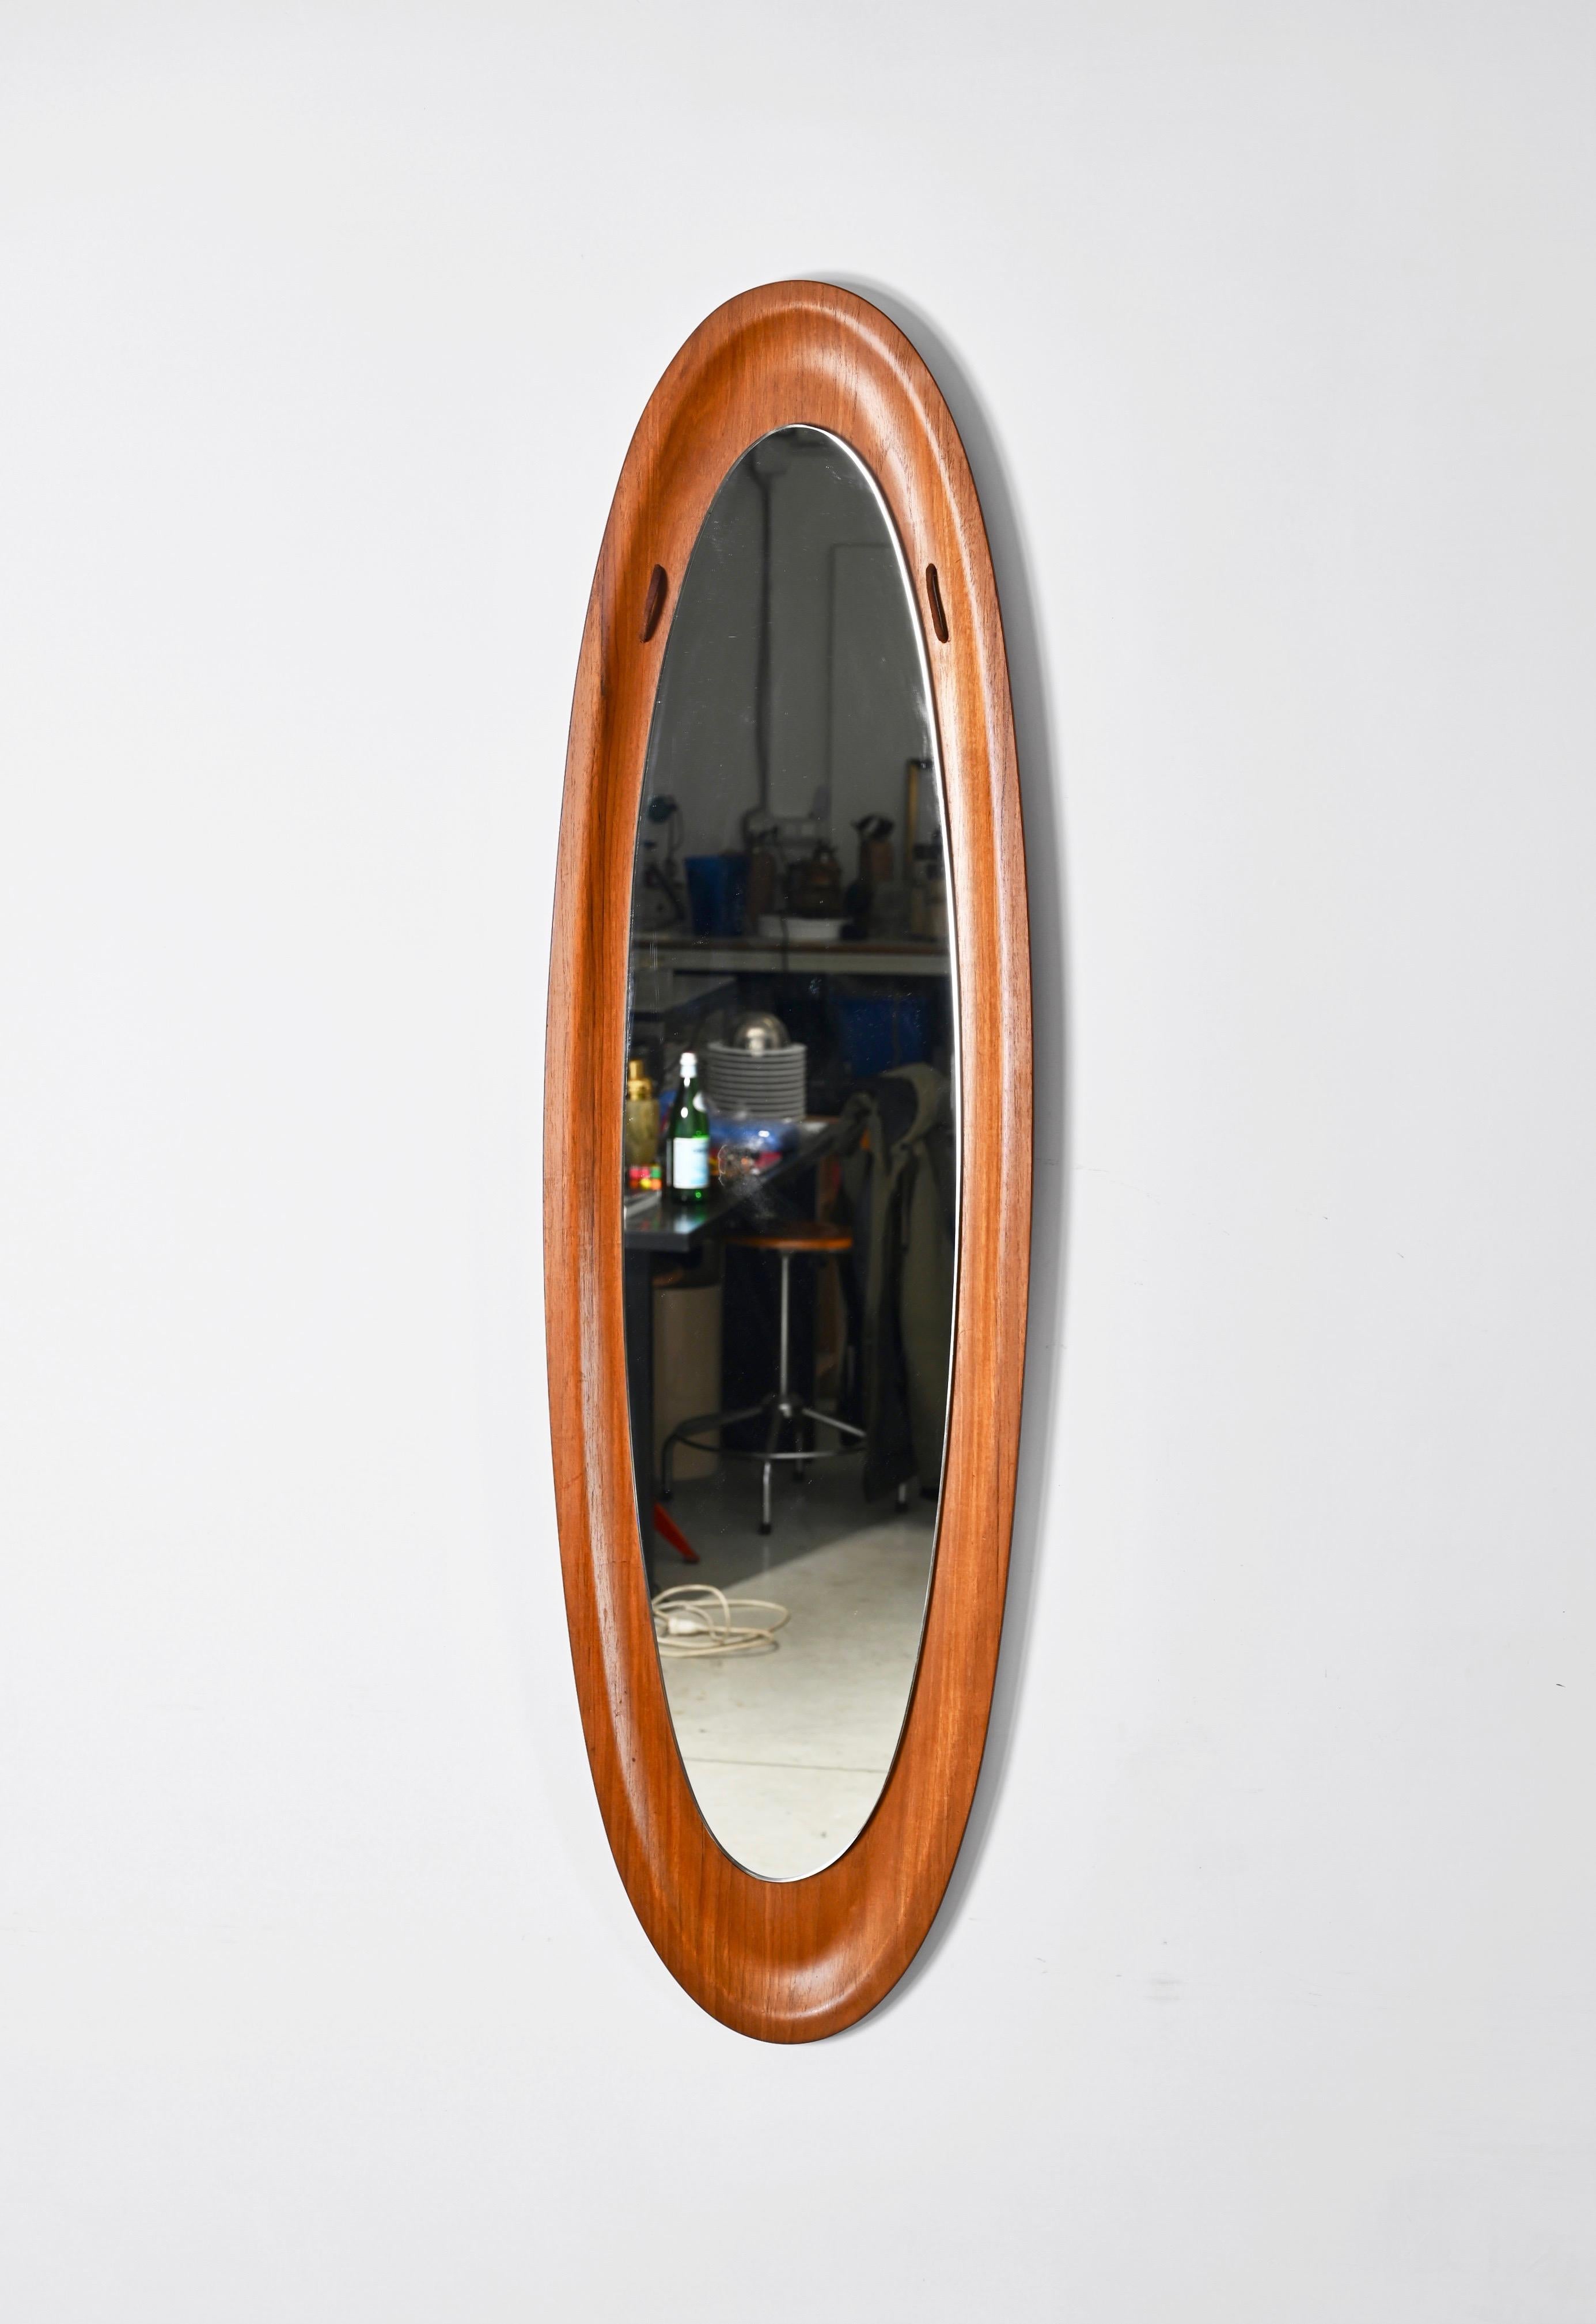 Glass Mid-Century Campo & Graffi Curved Teak Wood Oval Wall Mirror, Italy, 1960s For Sale